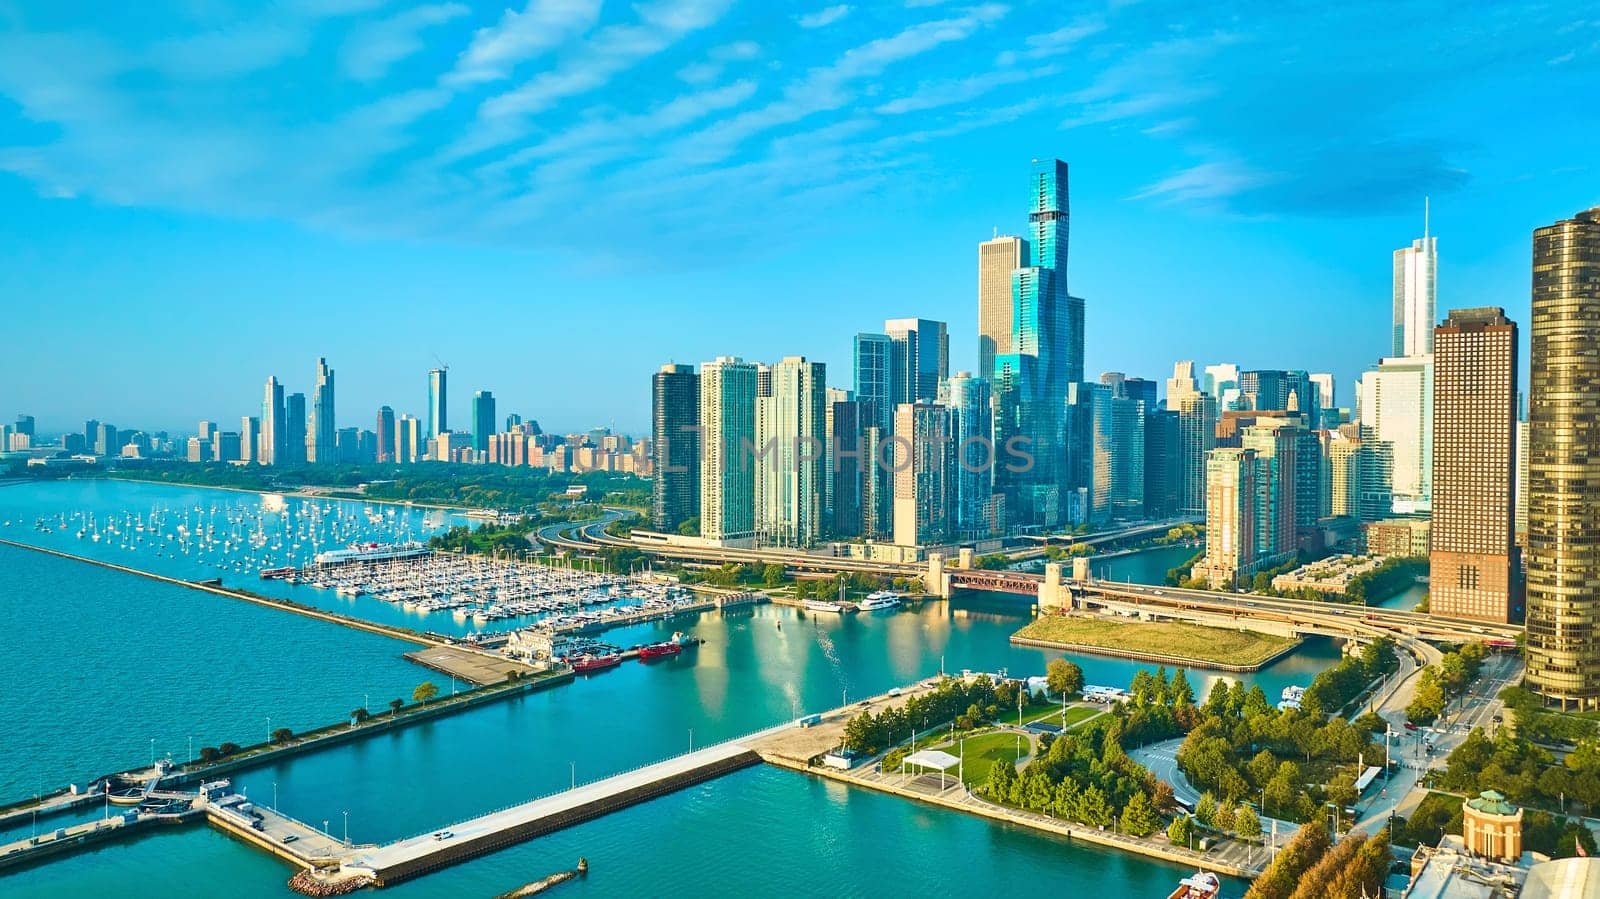 Image of Lake Michigan coastline from Chicago, IL with Navy Pier and city skyscrapers in summer aerial